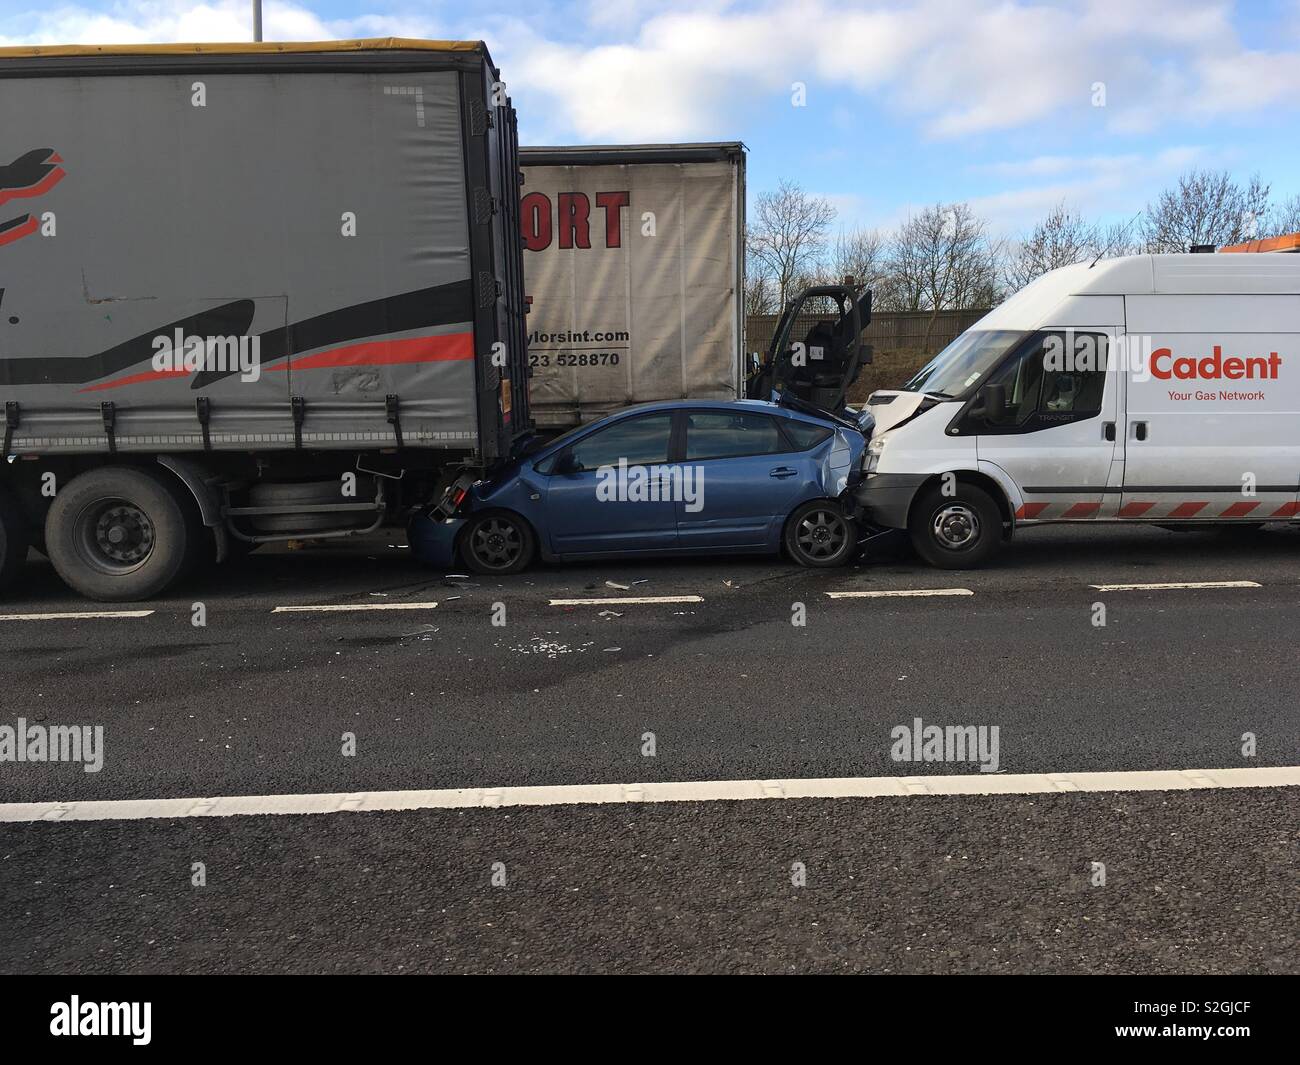 Stationary Toyota Prius squashed between 2 vehicles on M25 motorway after a truck crashed into the rear of the stationary Transit van. Stock Photo